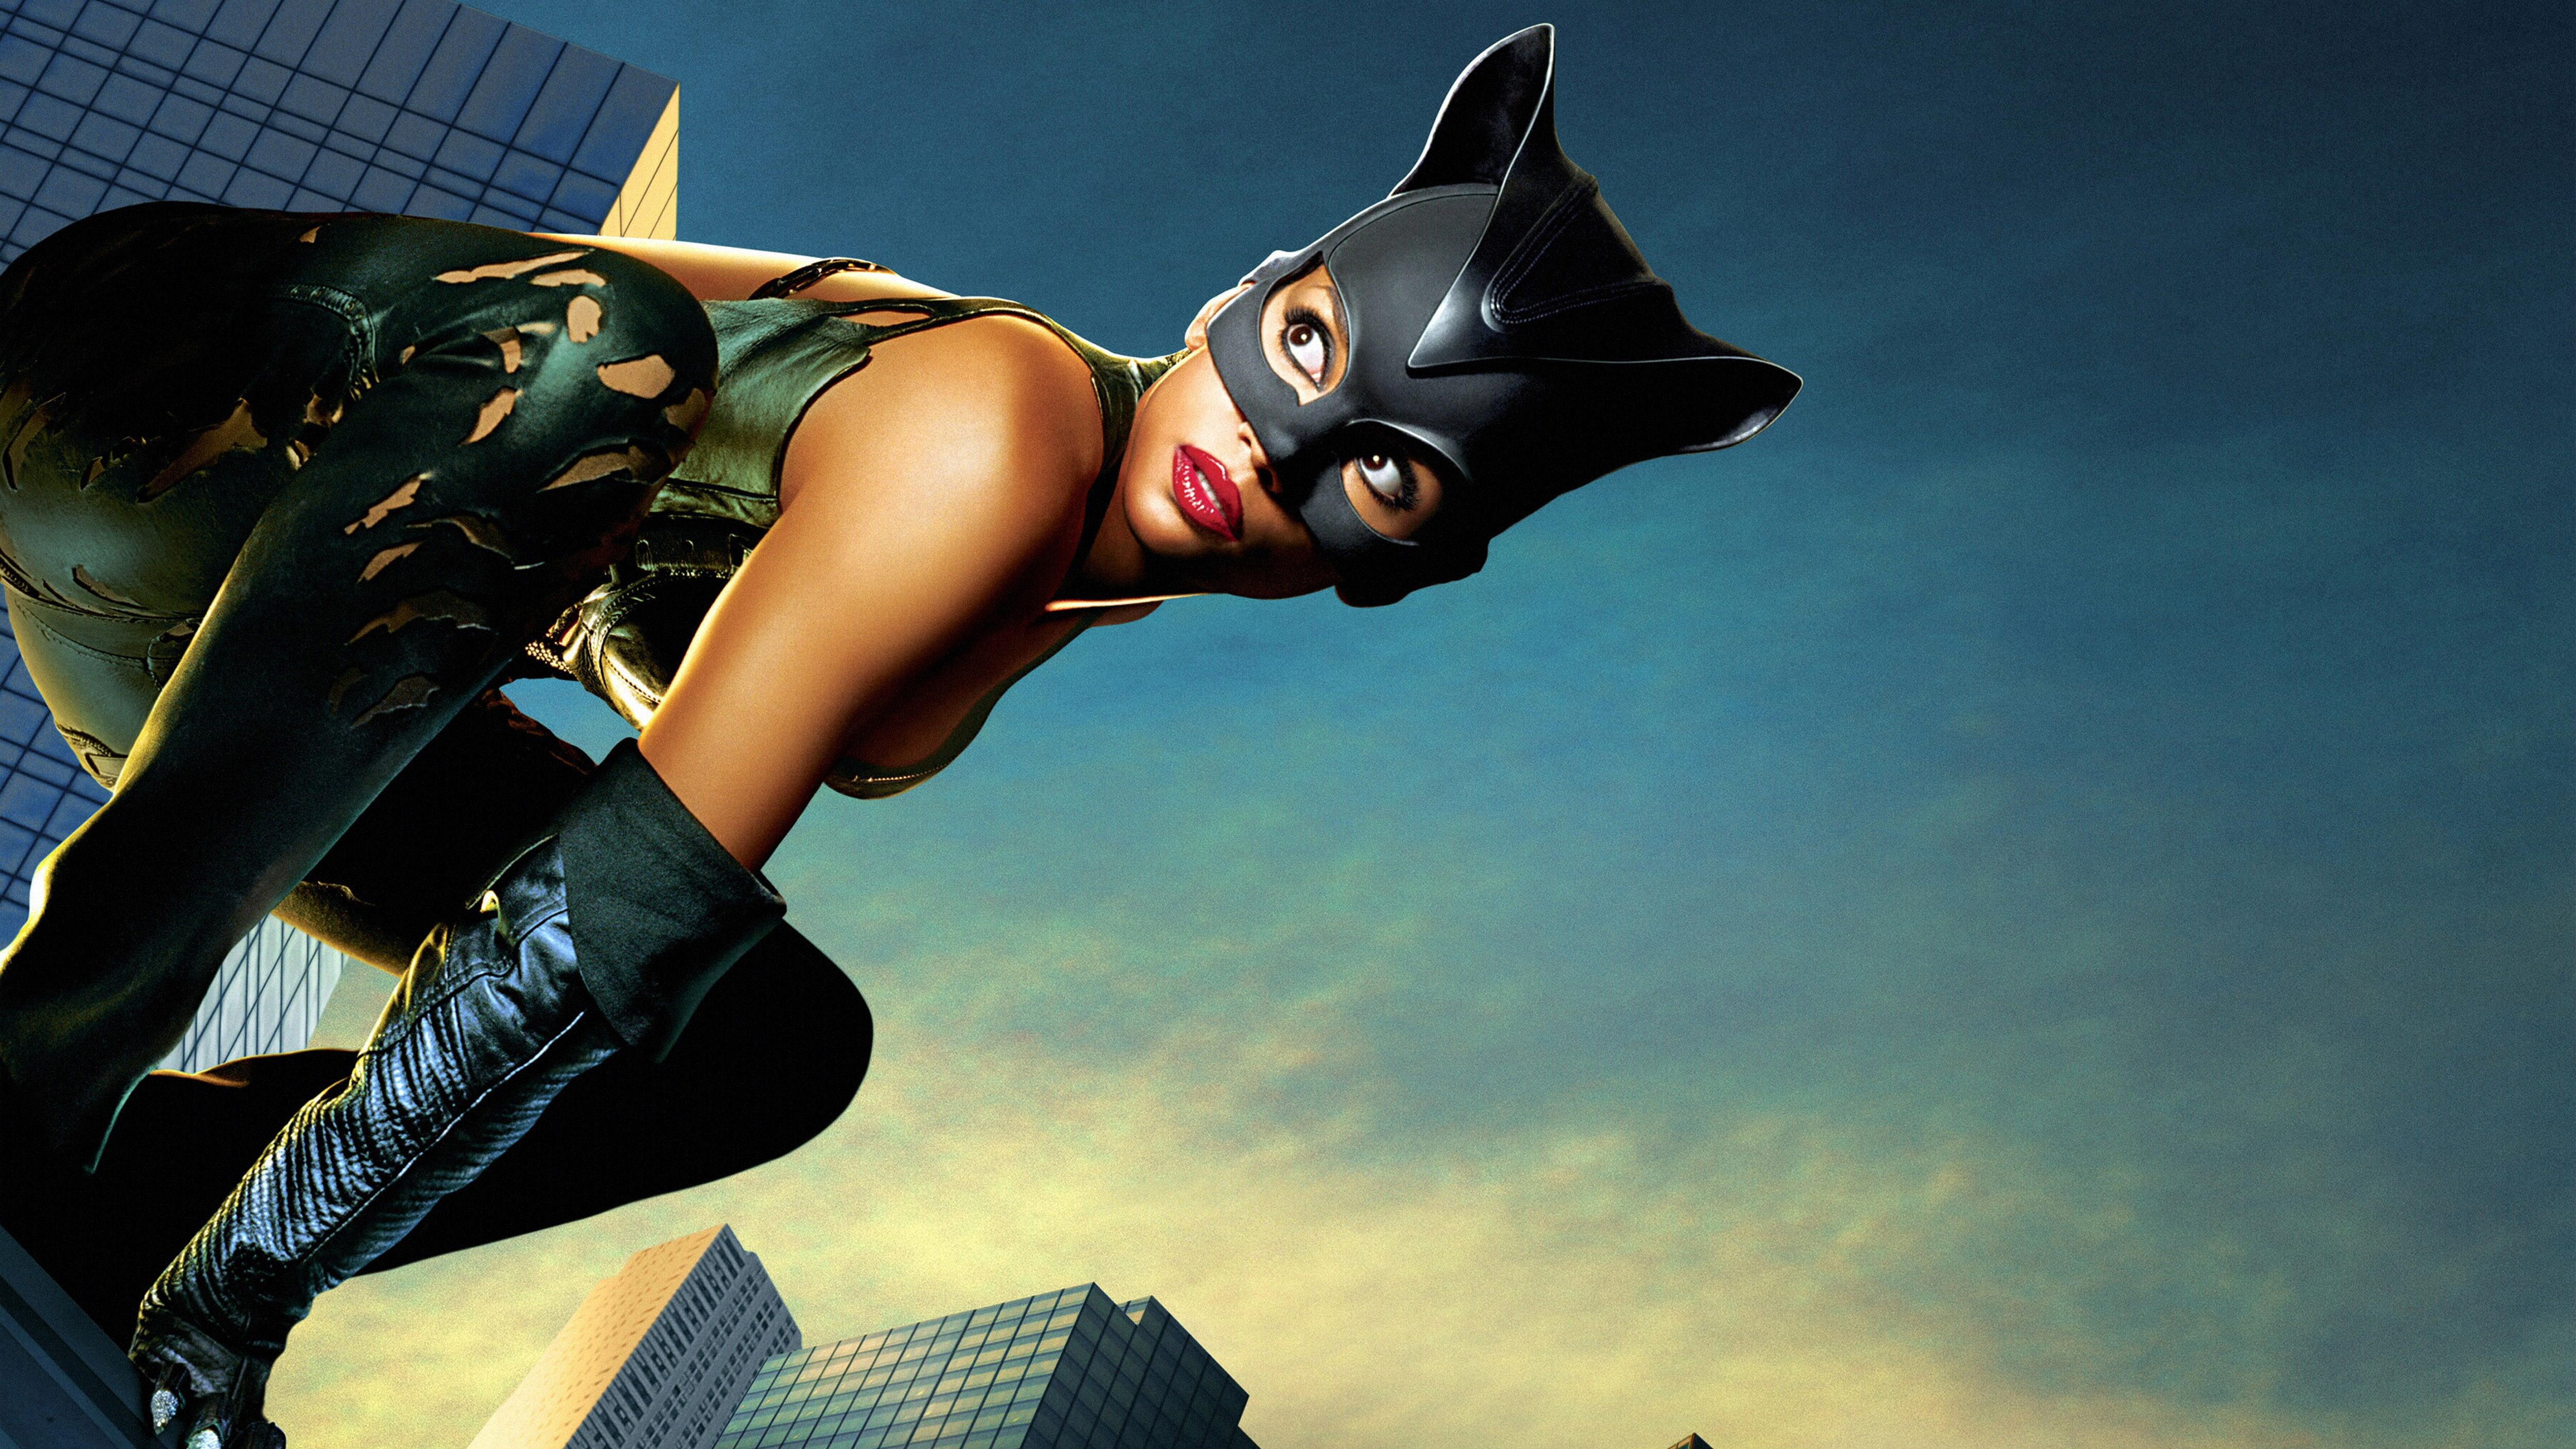 Wallpaper Catwoman, Halle Berry, 4K, Movies,. Wallpaper for iPhone, Android, Mobile and Desktop